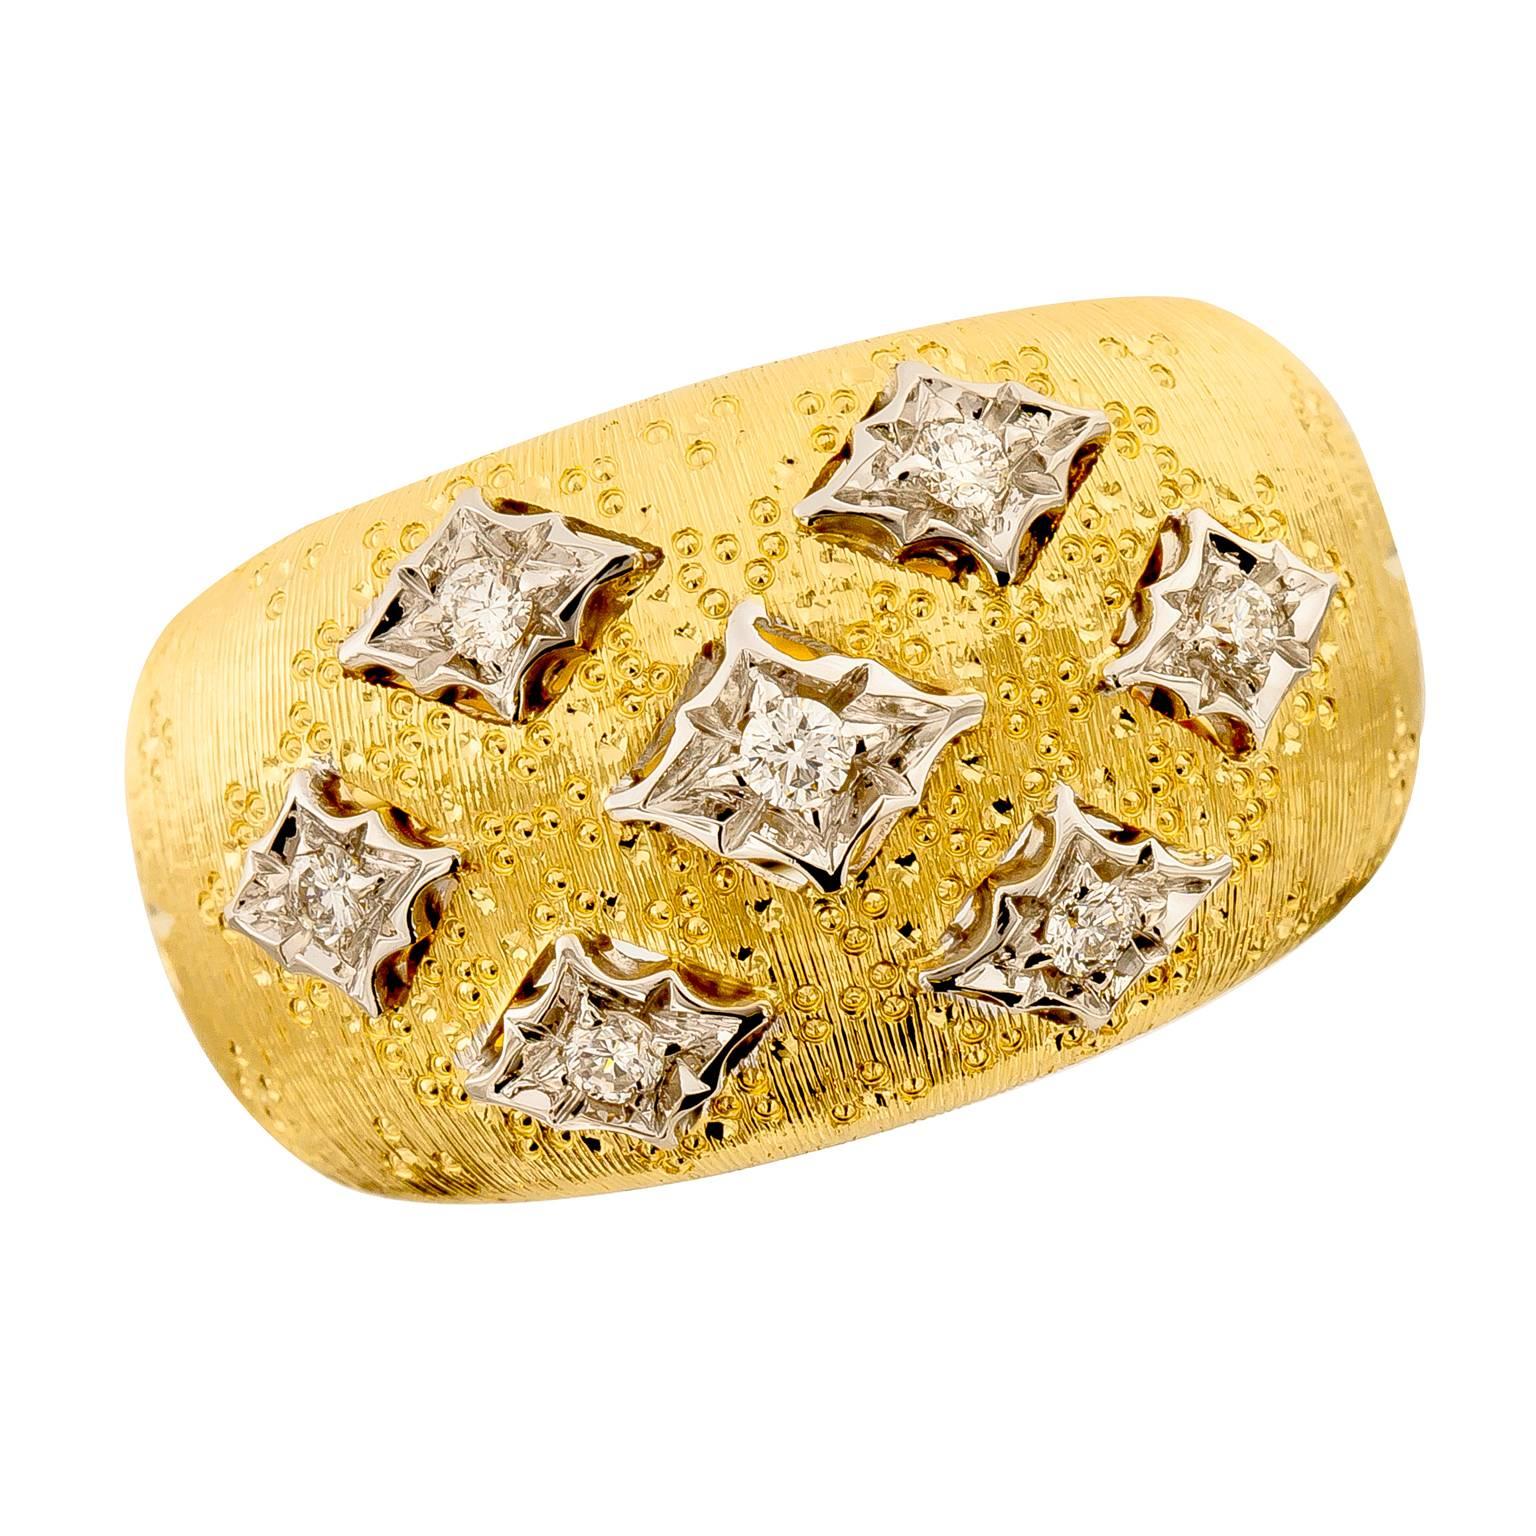 18k yellow and white gold wide dome ring accented with seven diamonds = 0.16 Cttw  Ring is inspired by the classic Buccellati design featuring textured gold made to look like fine fabric. Made in Italy Complimentary signature wrapping & presentation